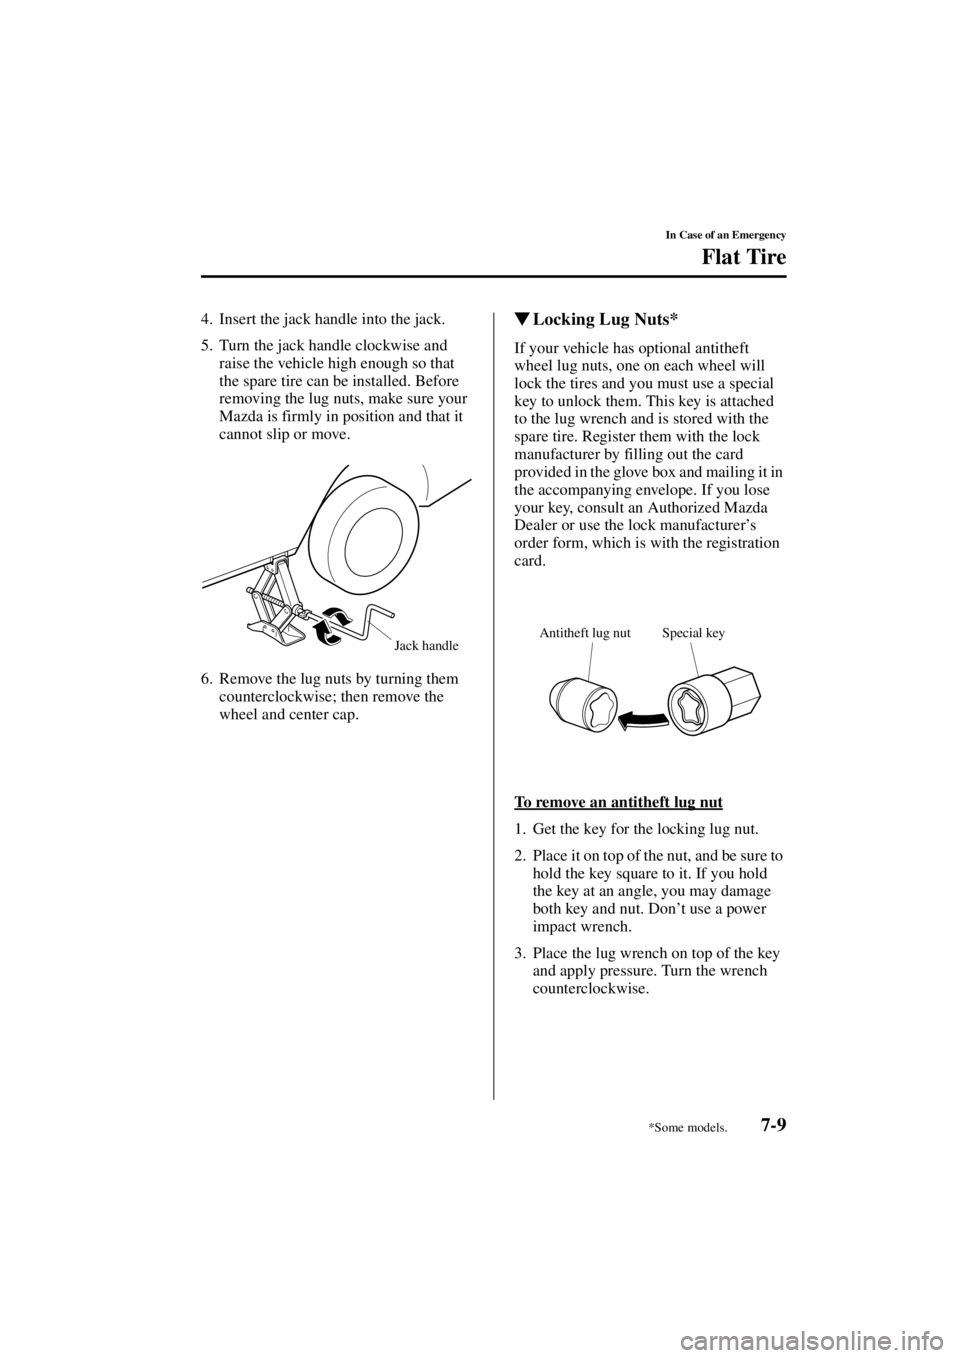 MAZDA MODEL 3 5-DOOR 2004 User Guide 7-9
In Case of an Emergency
Flat Tire
Form No. 8S18-EA-03I
4. Insert the jack handle into the jack.
5. Turn the jack handle clockwise and raise the vehicle high enough so that 
the spare tire can be i